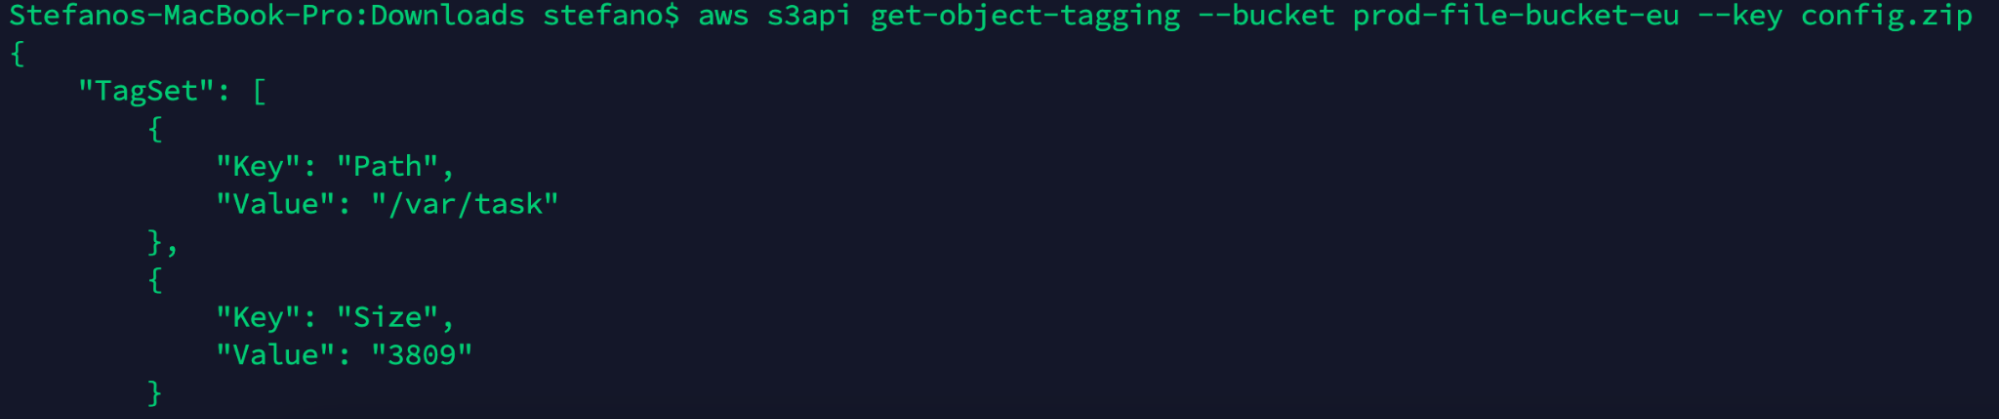 Similar information returned by get-tags from an S3 file upload